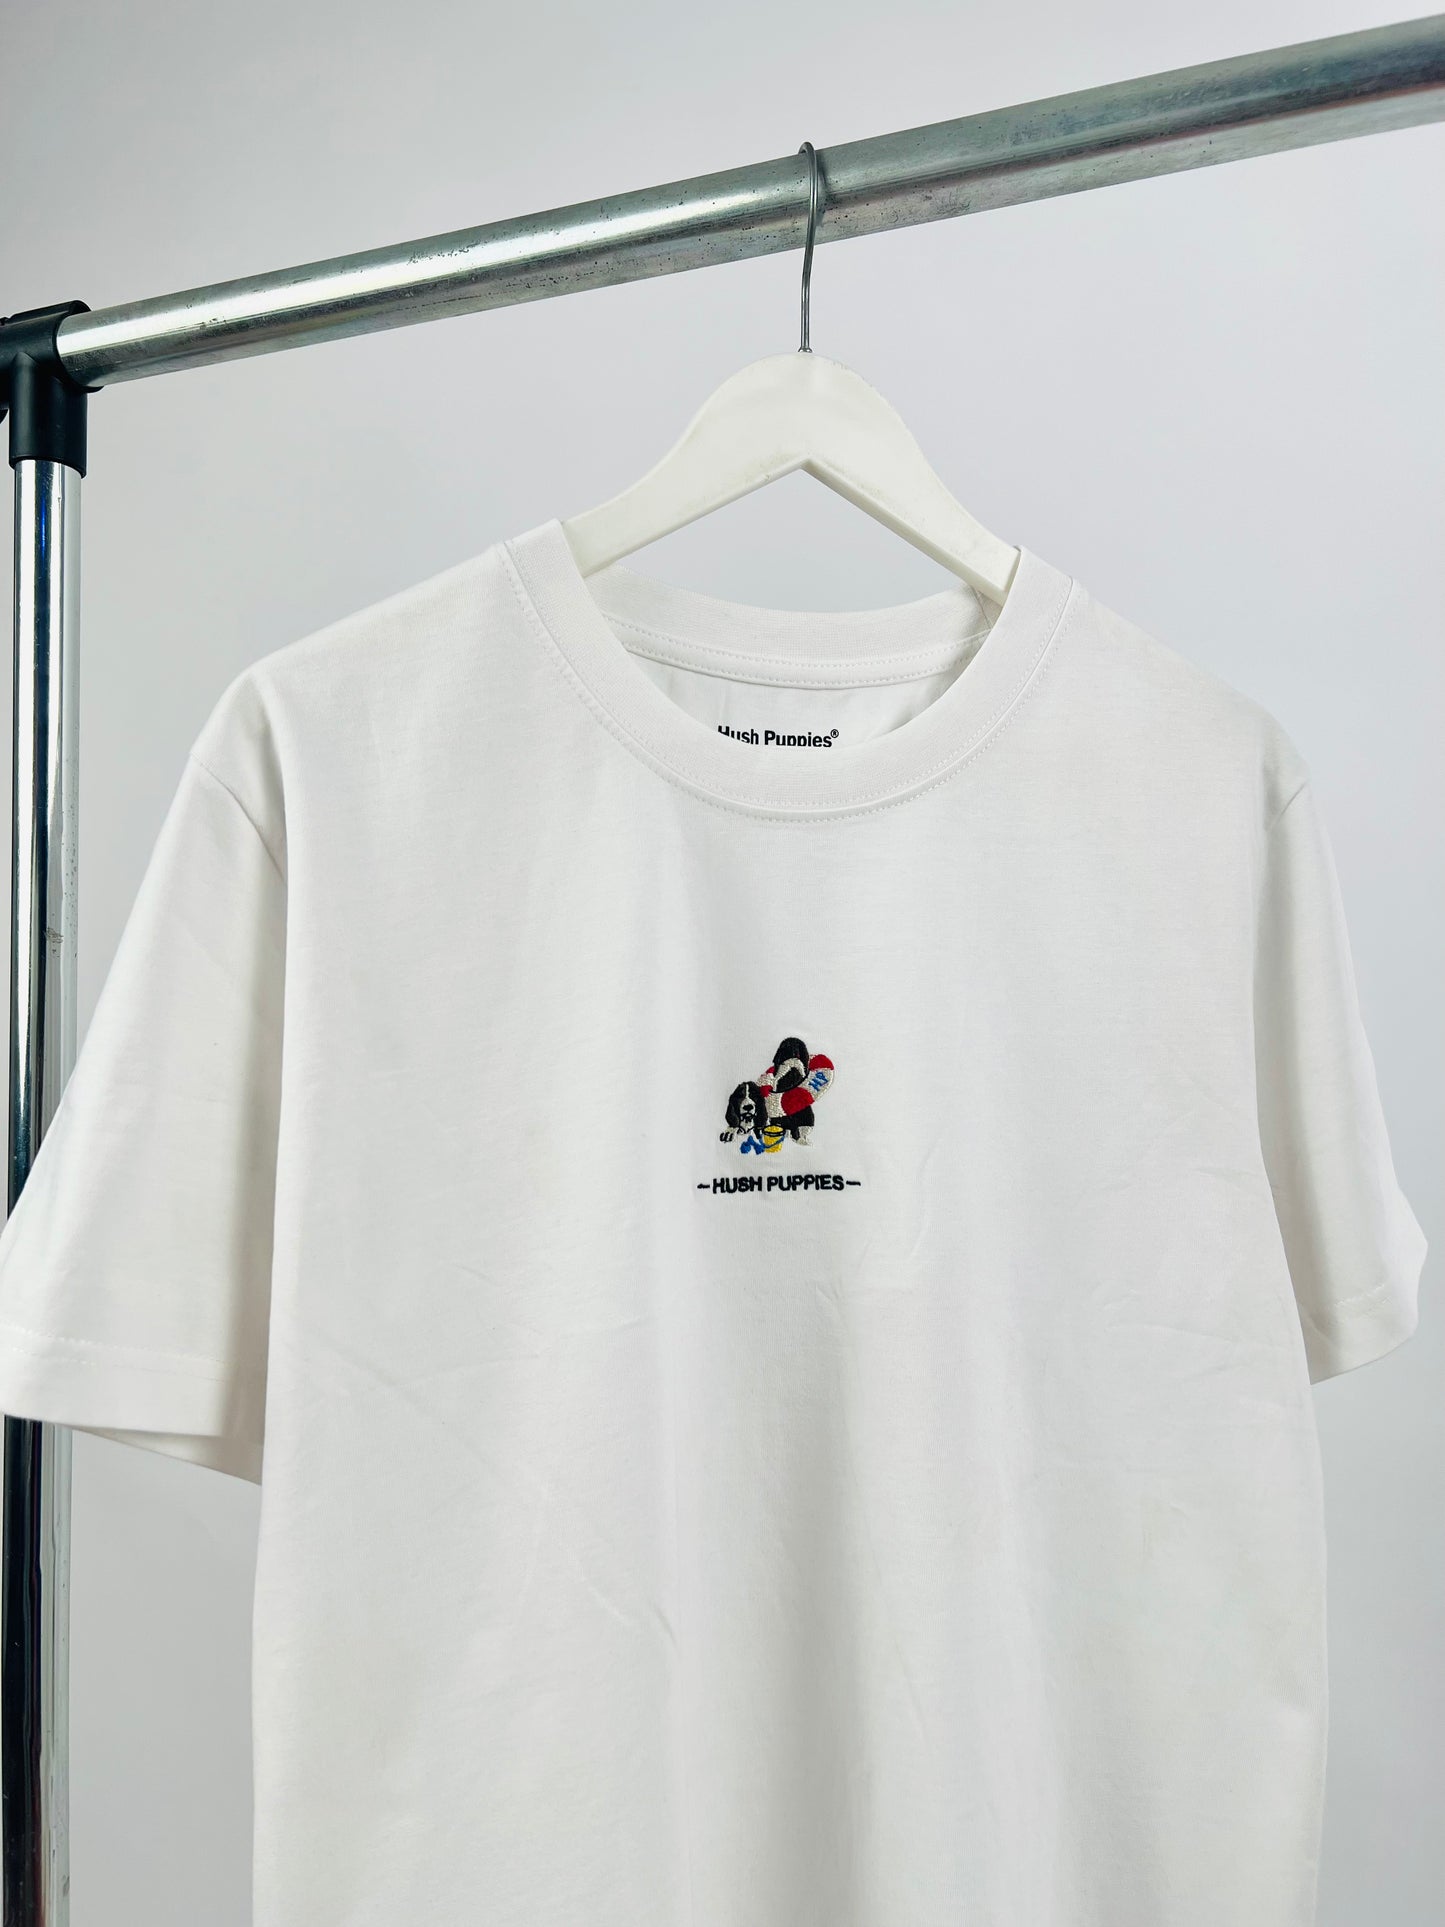 Hush Puppies embroidered T-shirt in white